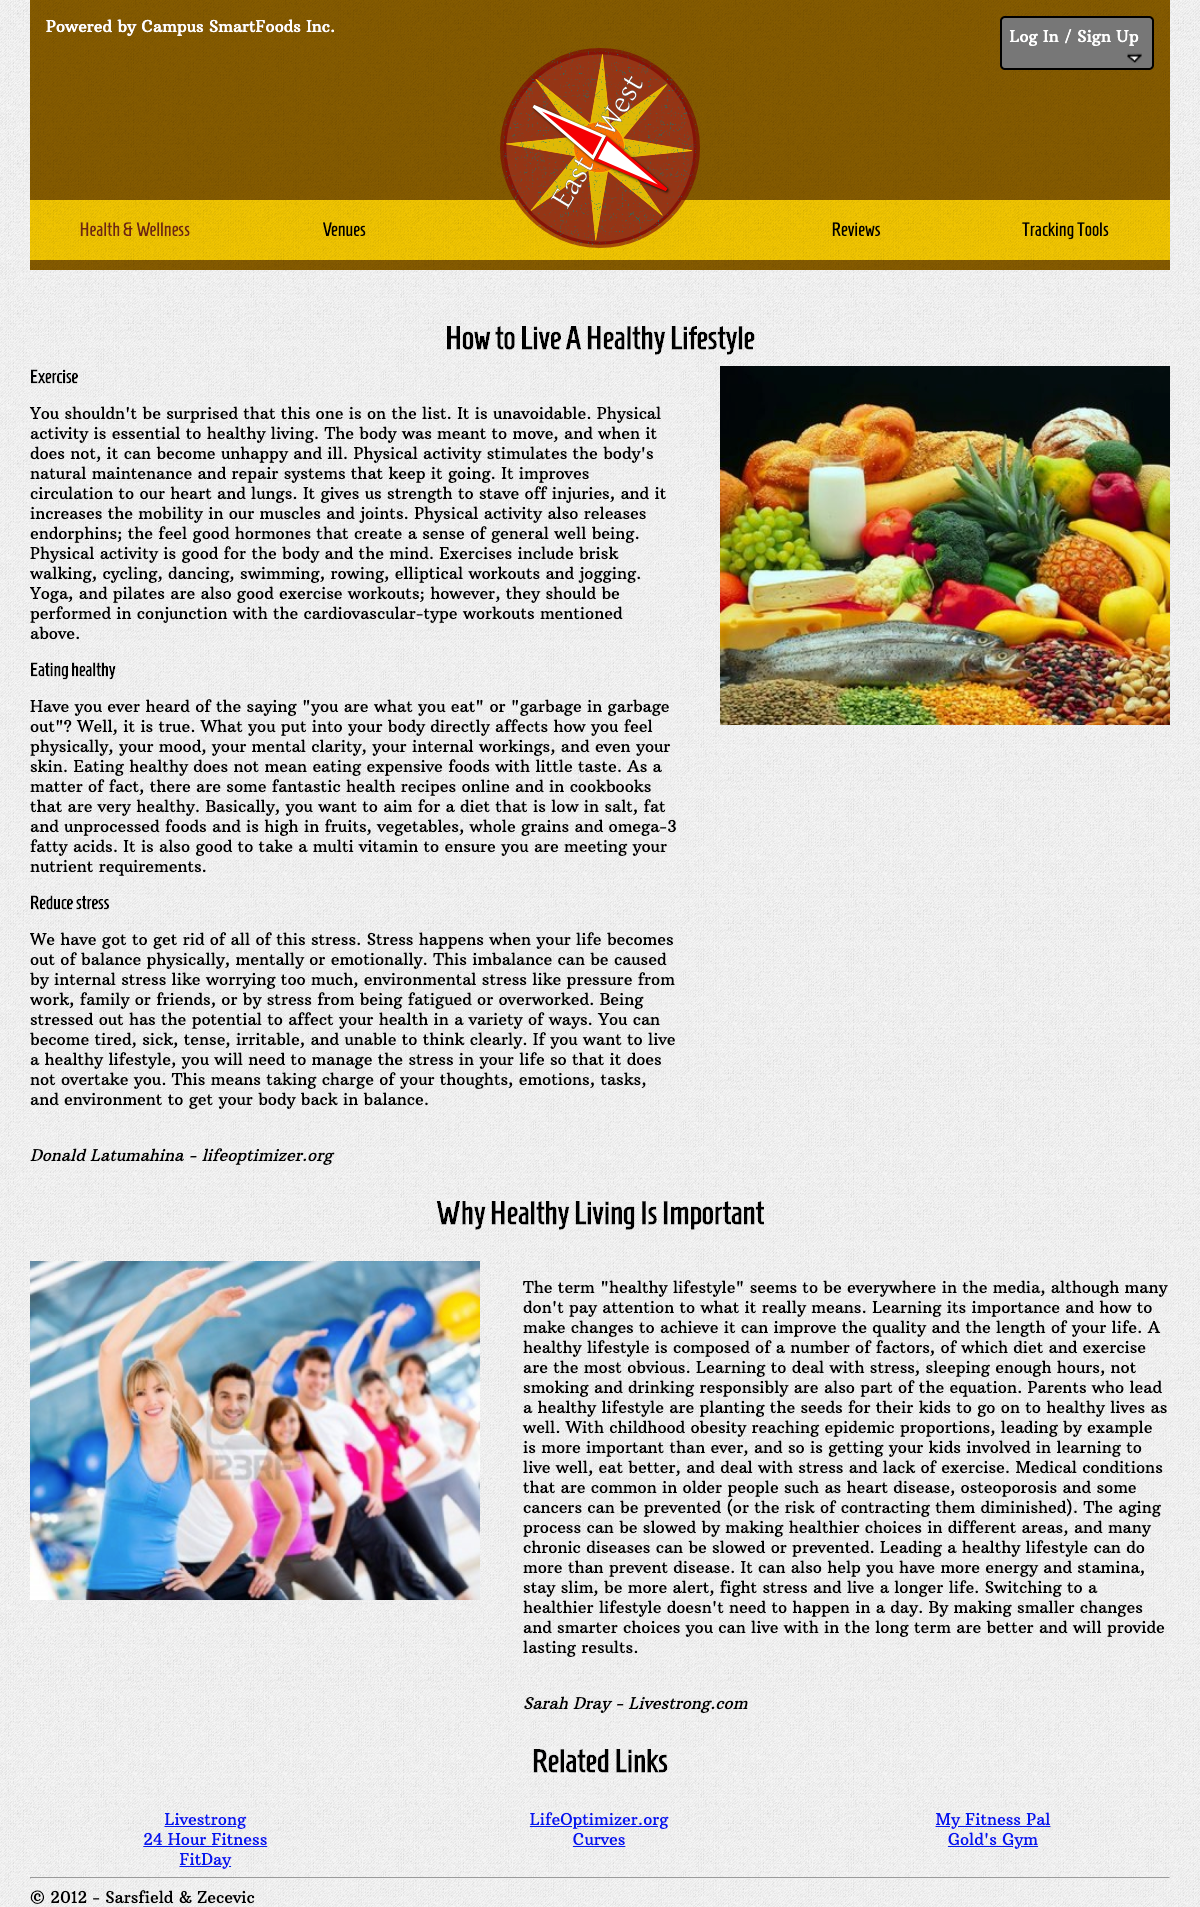 Campus Smart Foods - Health Page